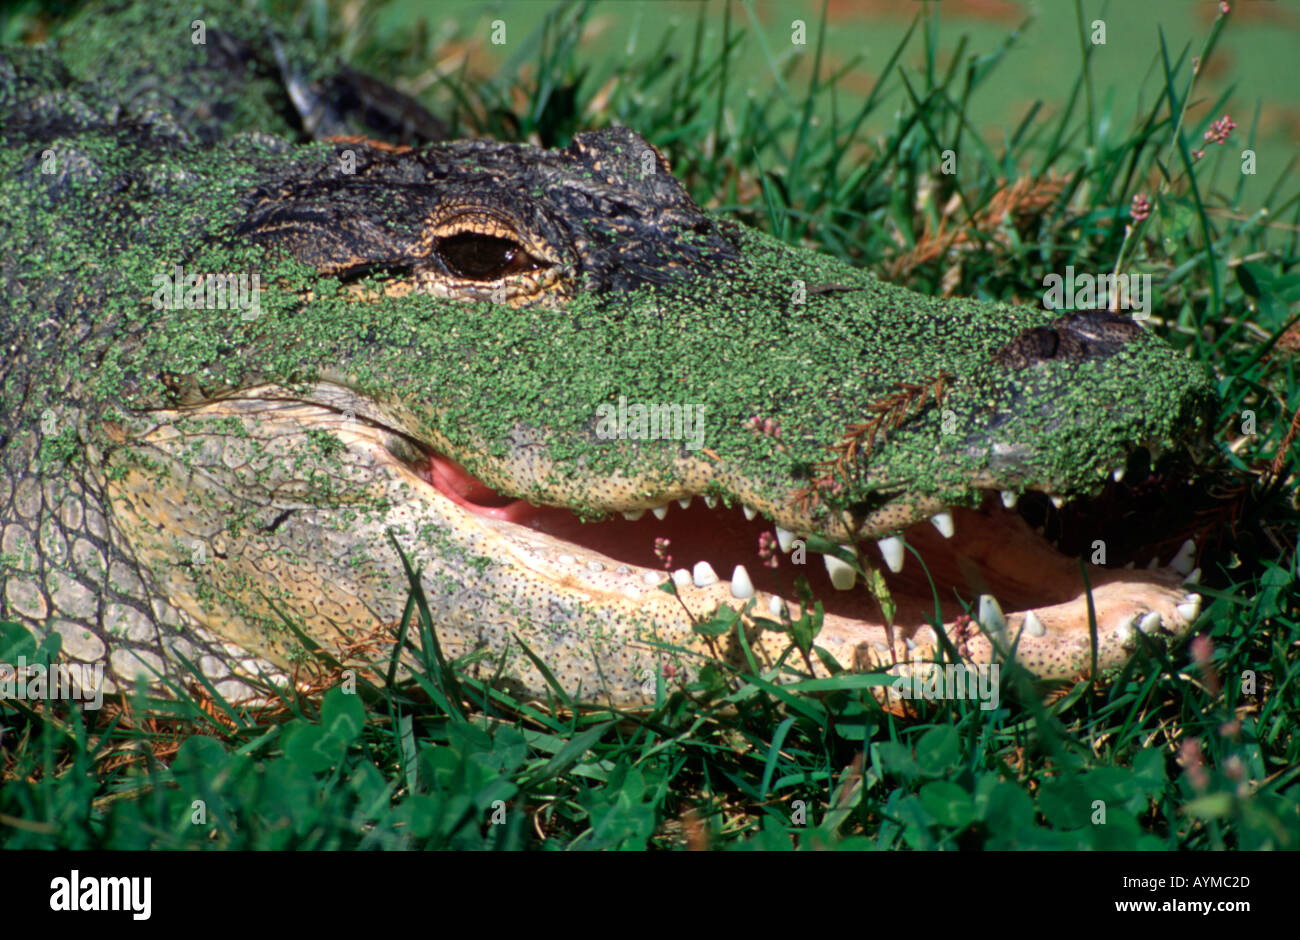 American alligator, Alligator missipiensis, basking in the sun on a clover field next to a pond covered with duckweed. Stock Photo